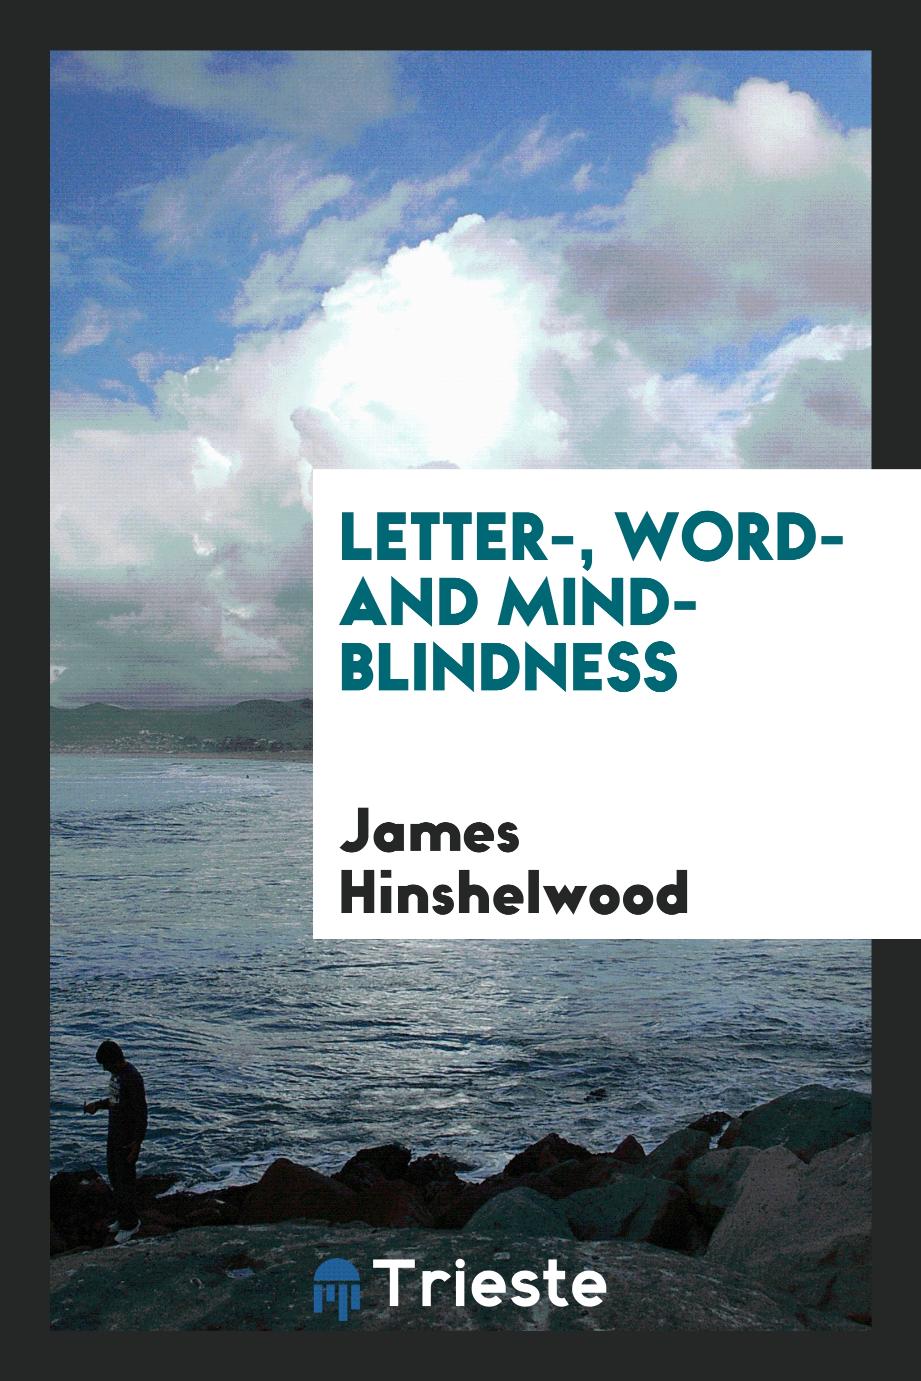 Letter-, Word- and Mind- Blindness